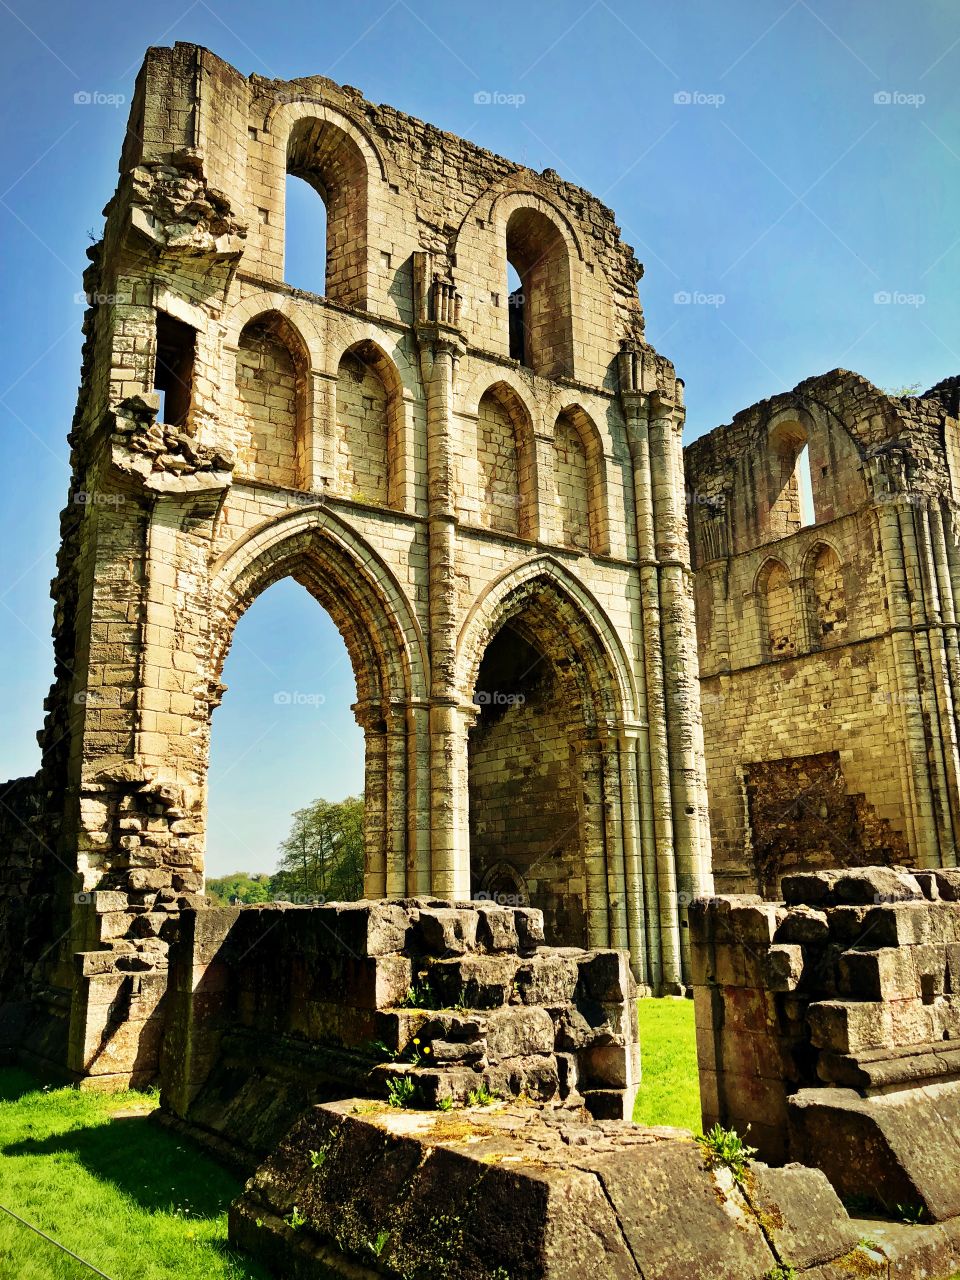 Old ruins of historical Abbey with gothic architecture 